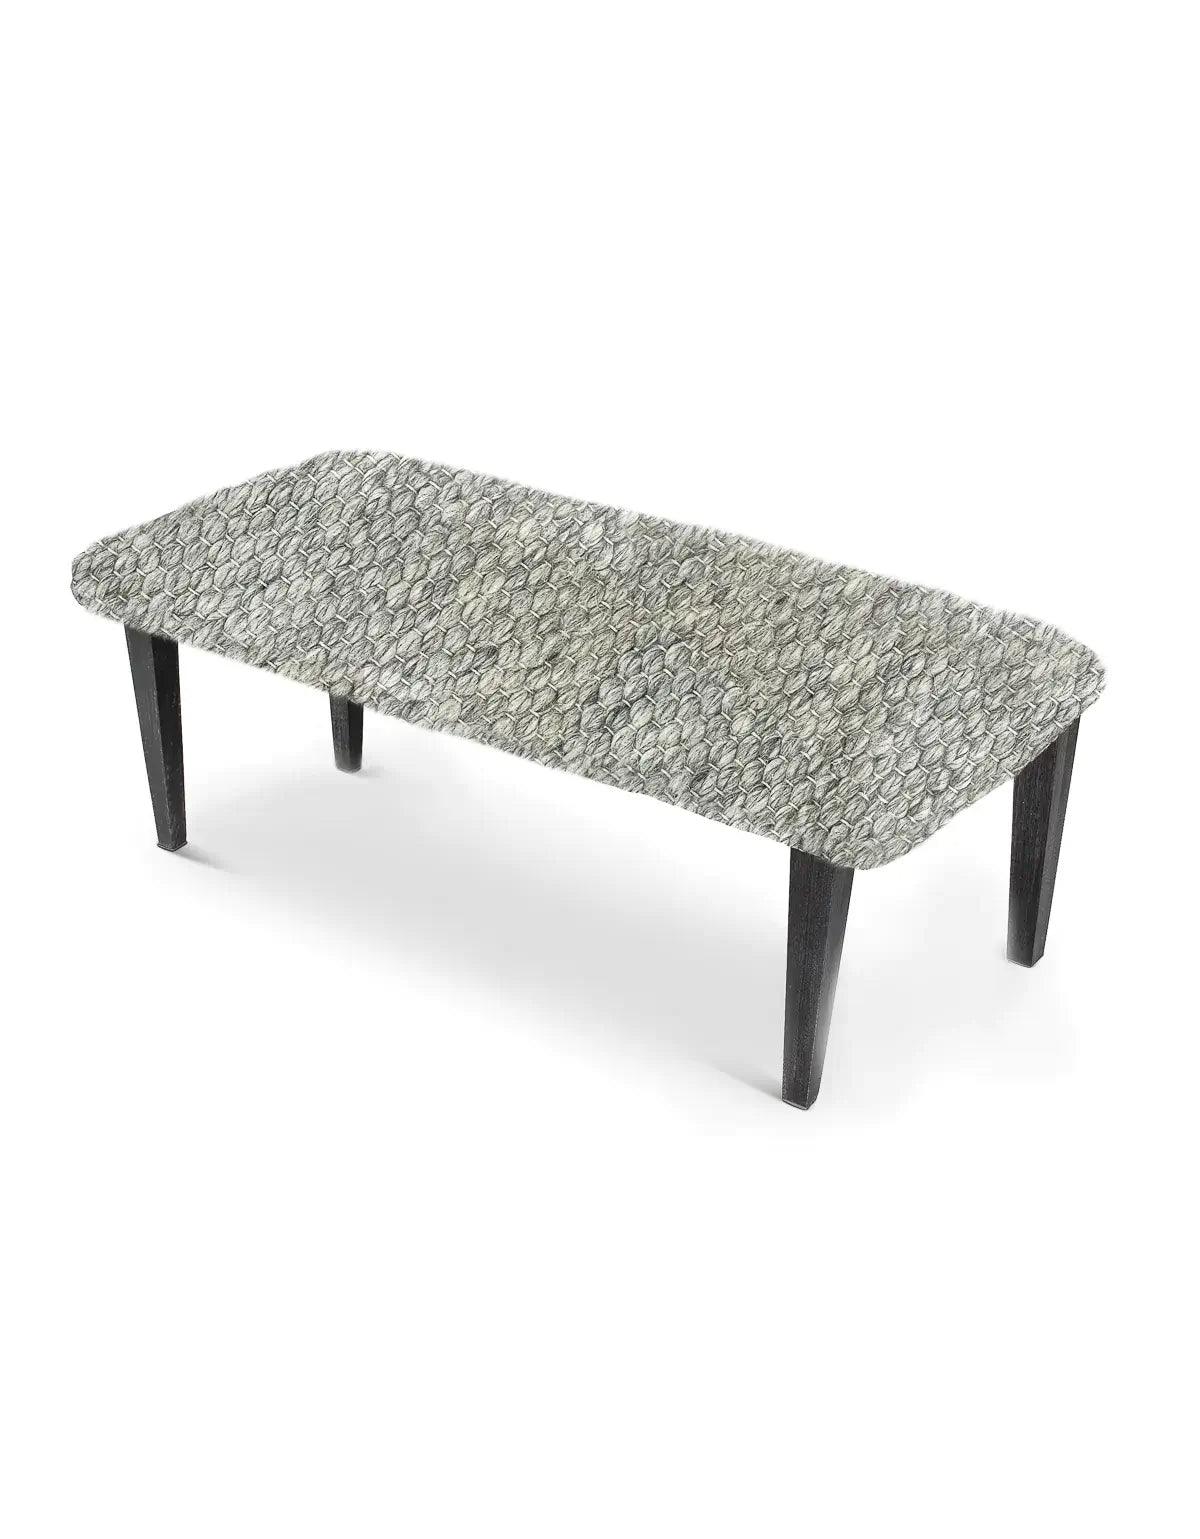 Handwoven Clean Grey Dining Room Table Bench - Nature Home Decor